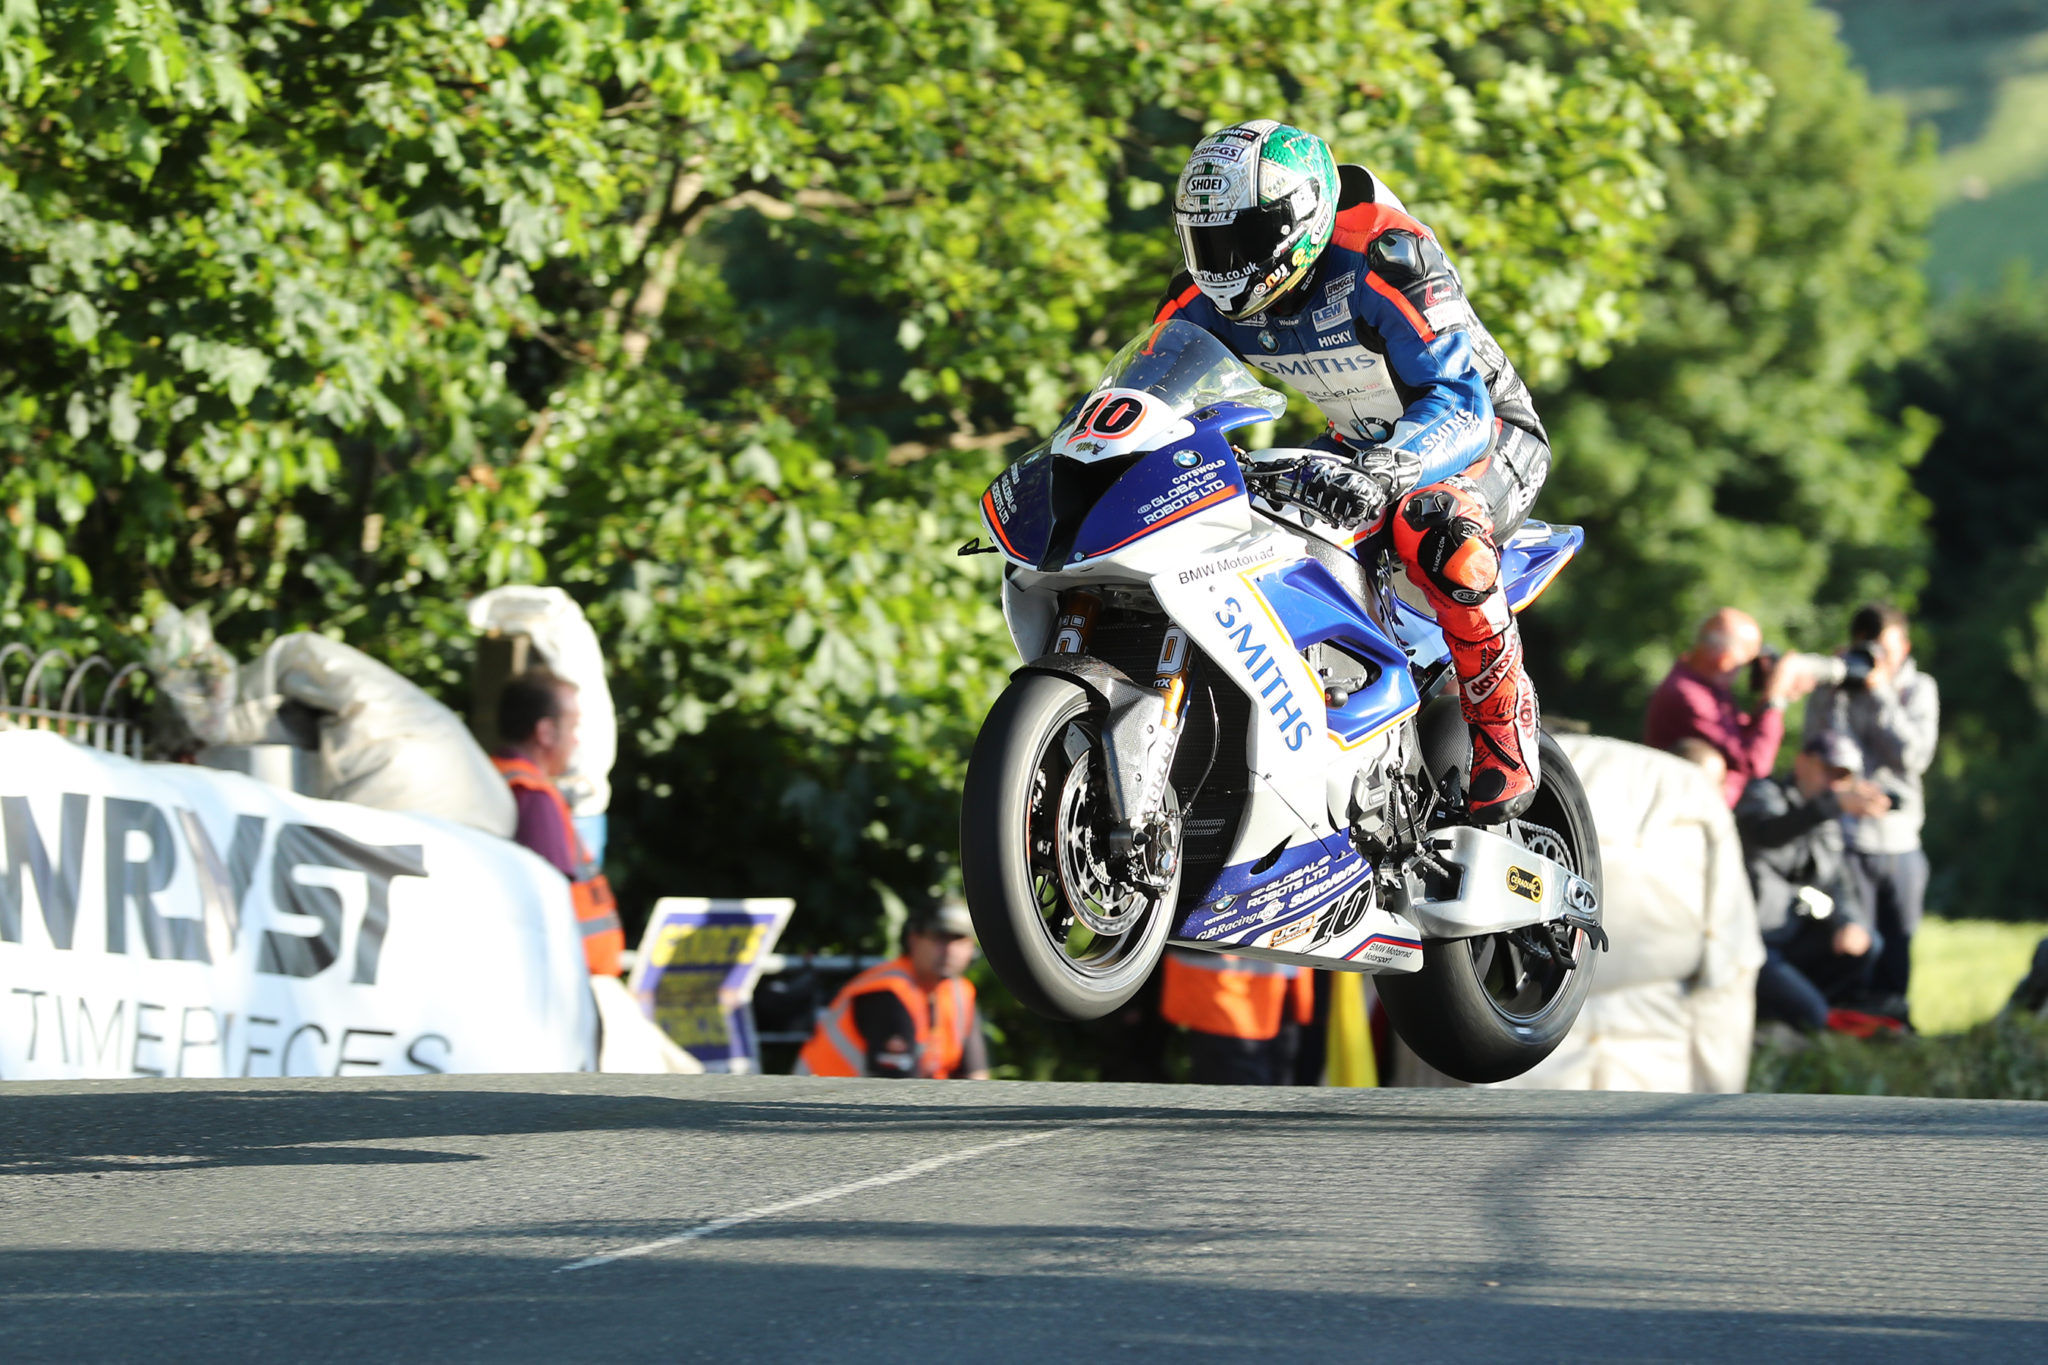 Peter Hickman at the TT in 2017 credit Pacemaker Press International